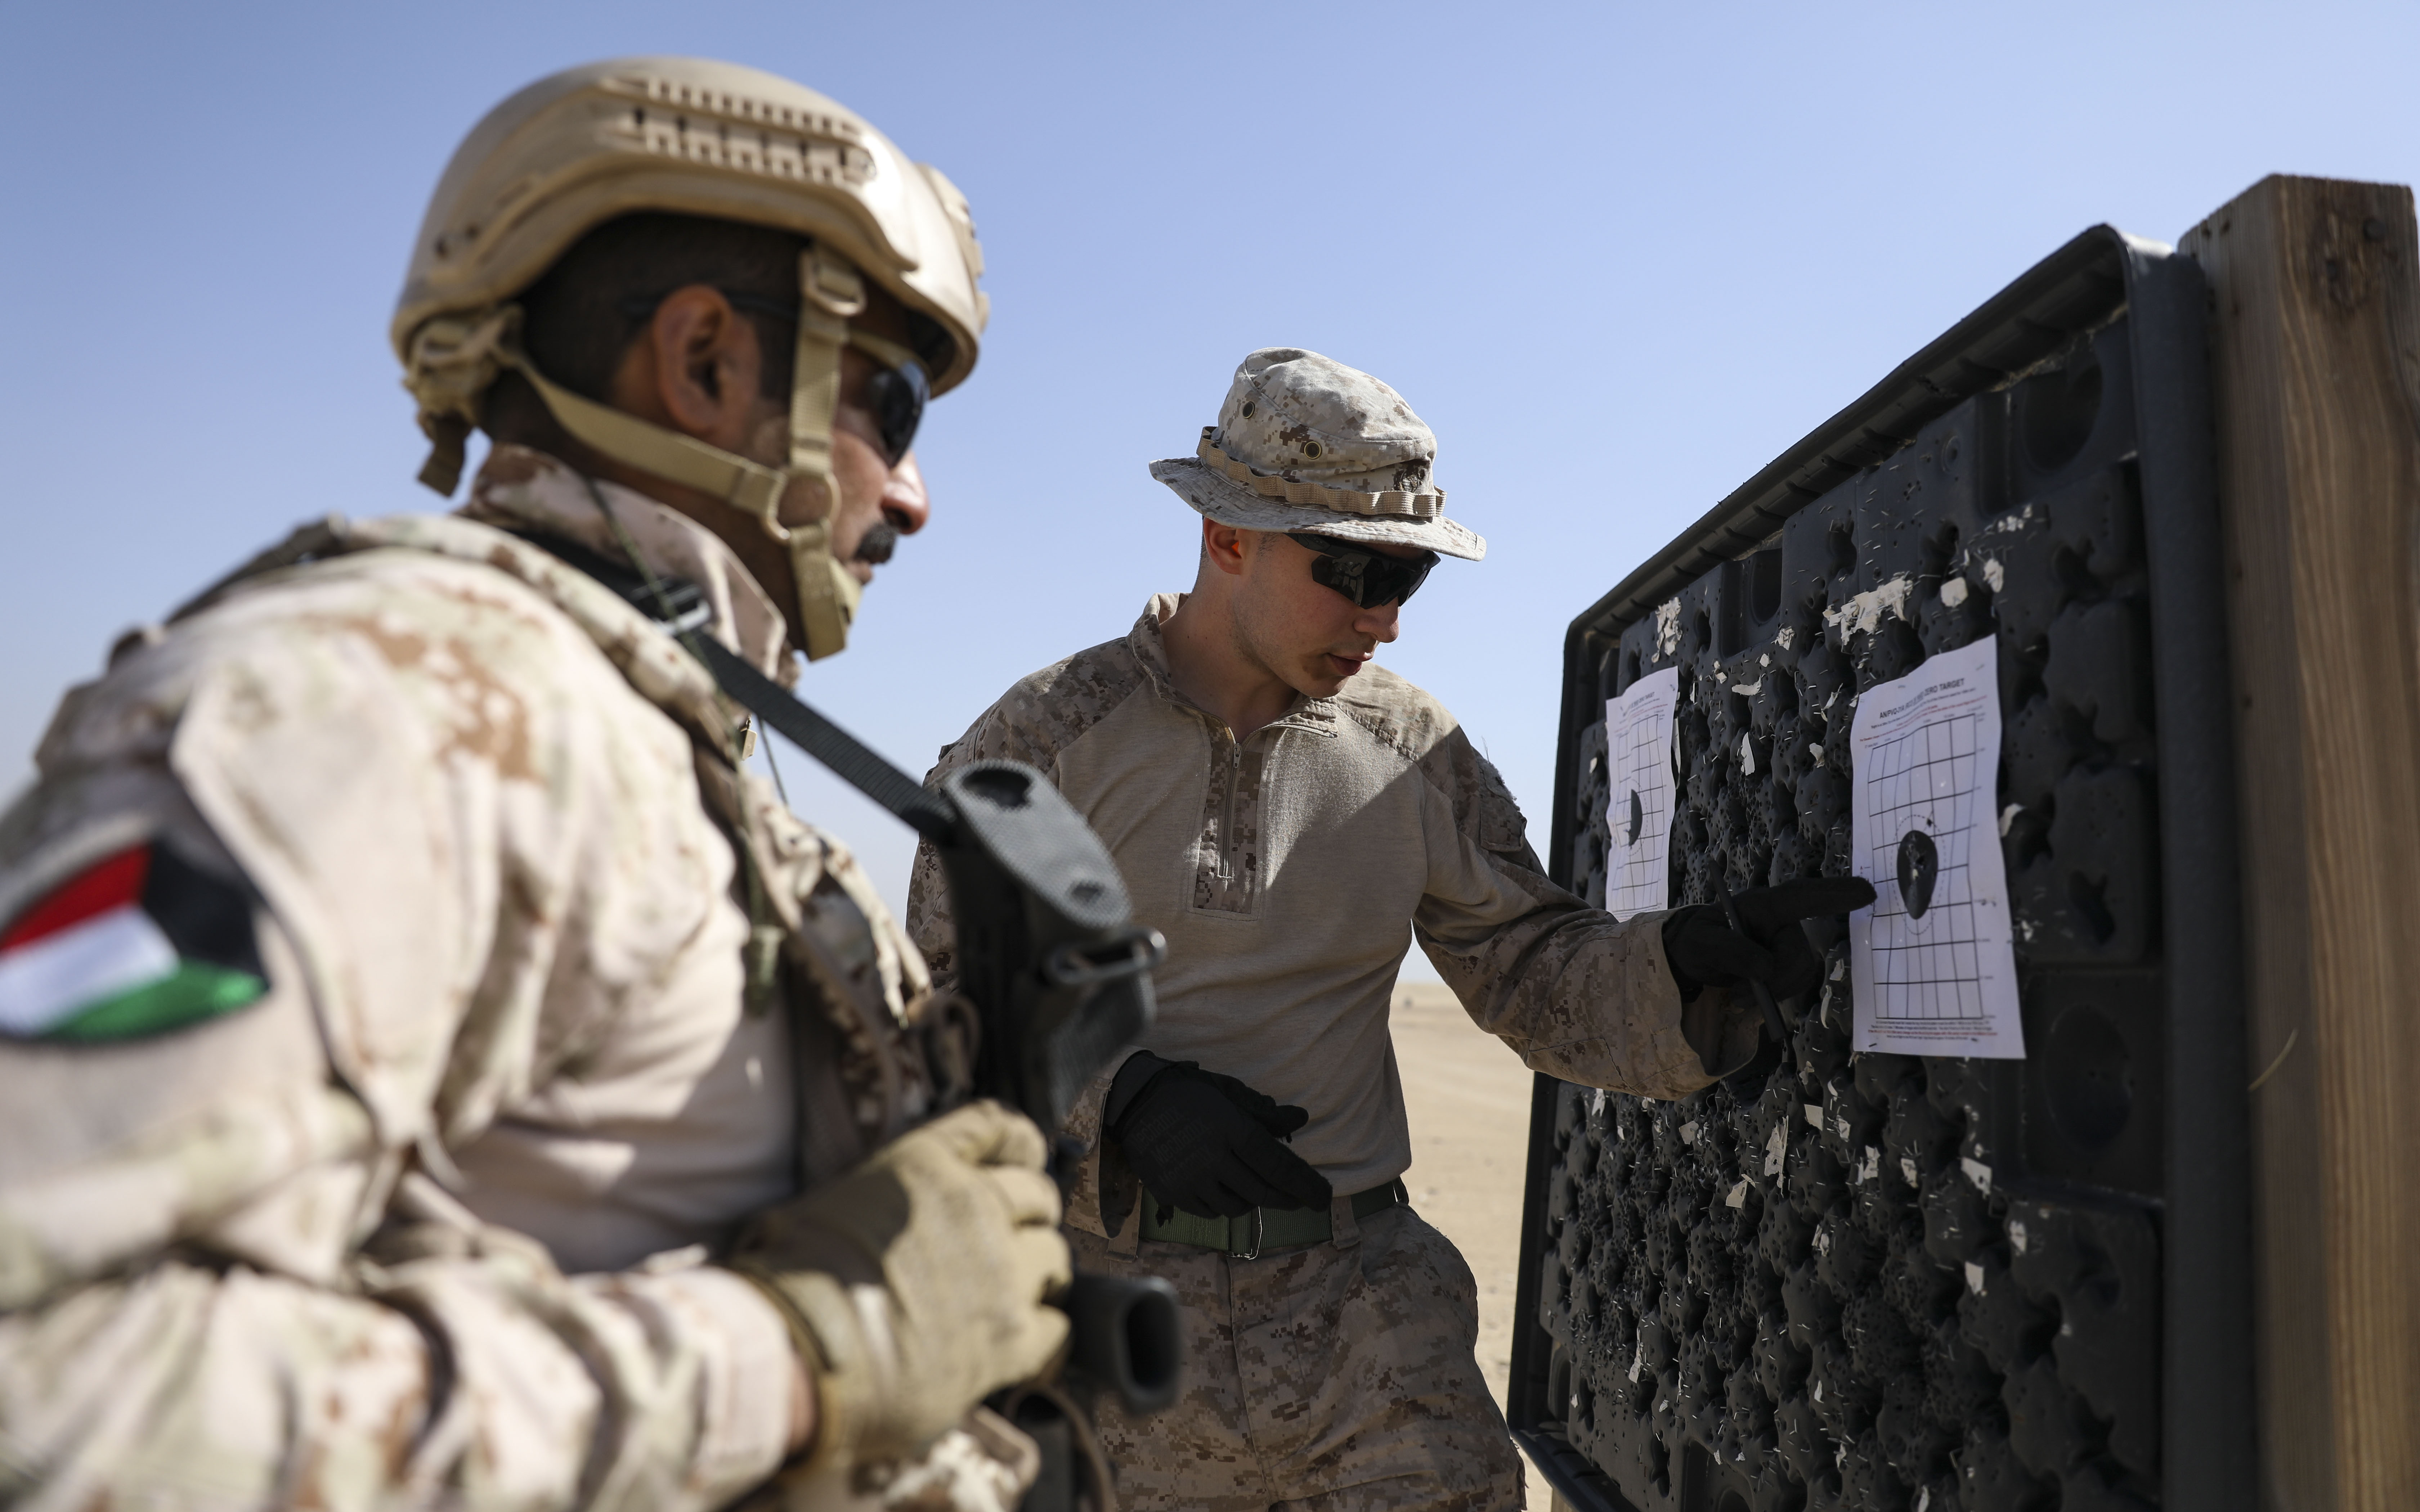 Marine unit leaves Kuwait exercise early because of 'emerging events